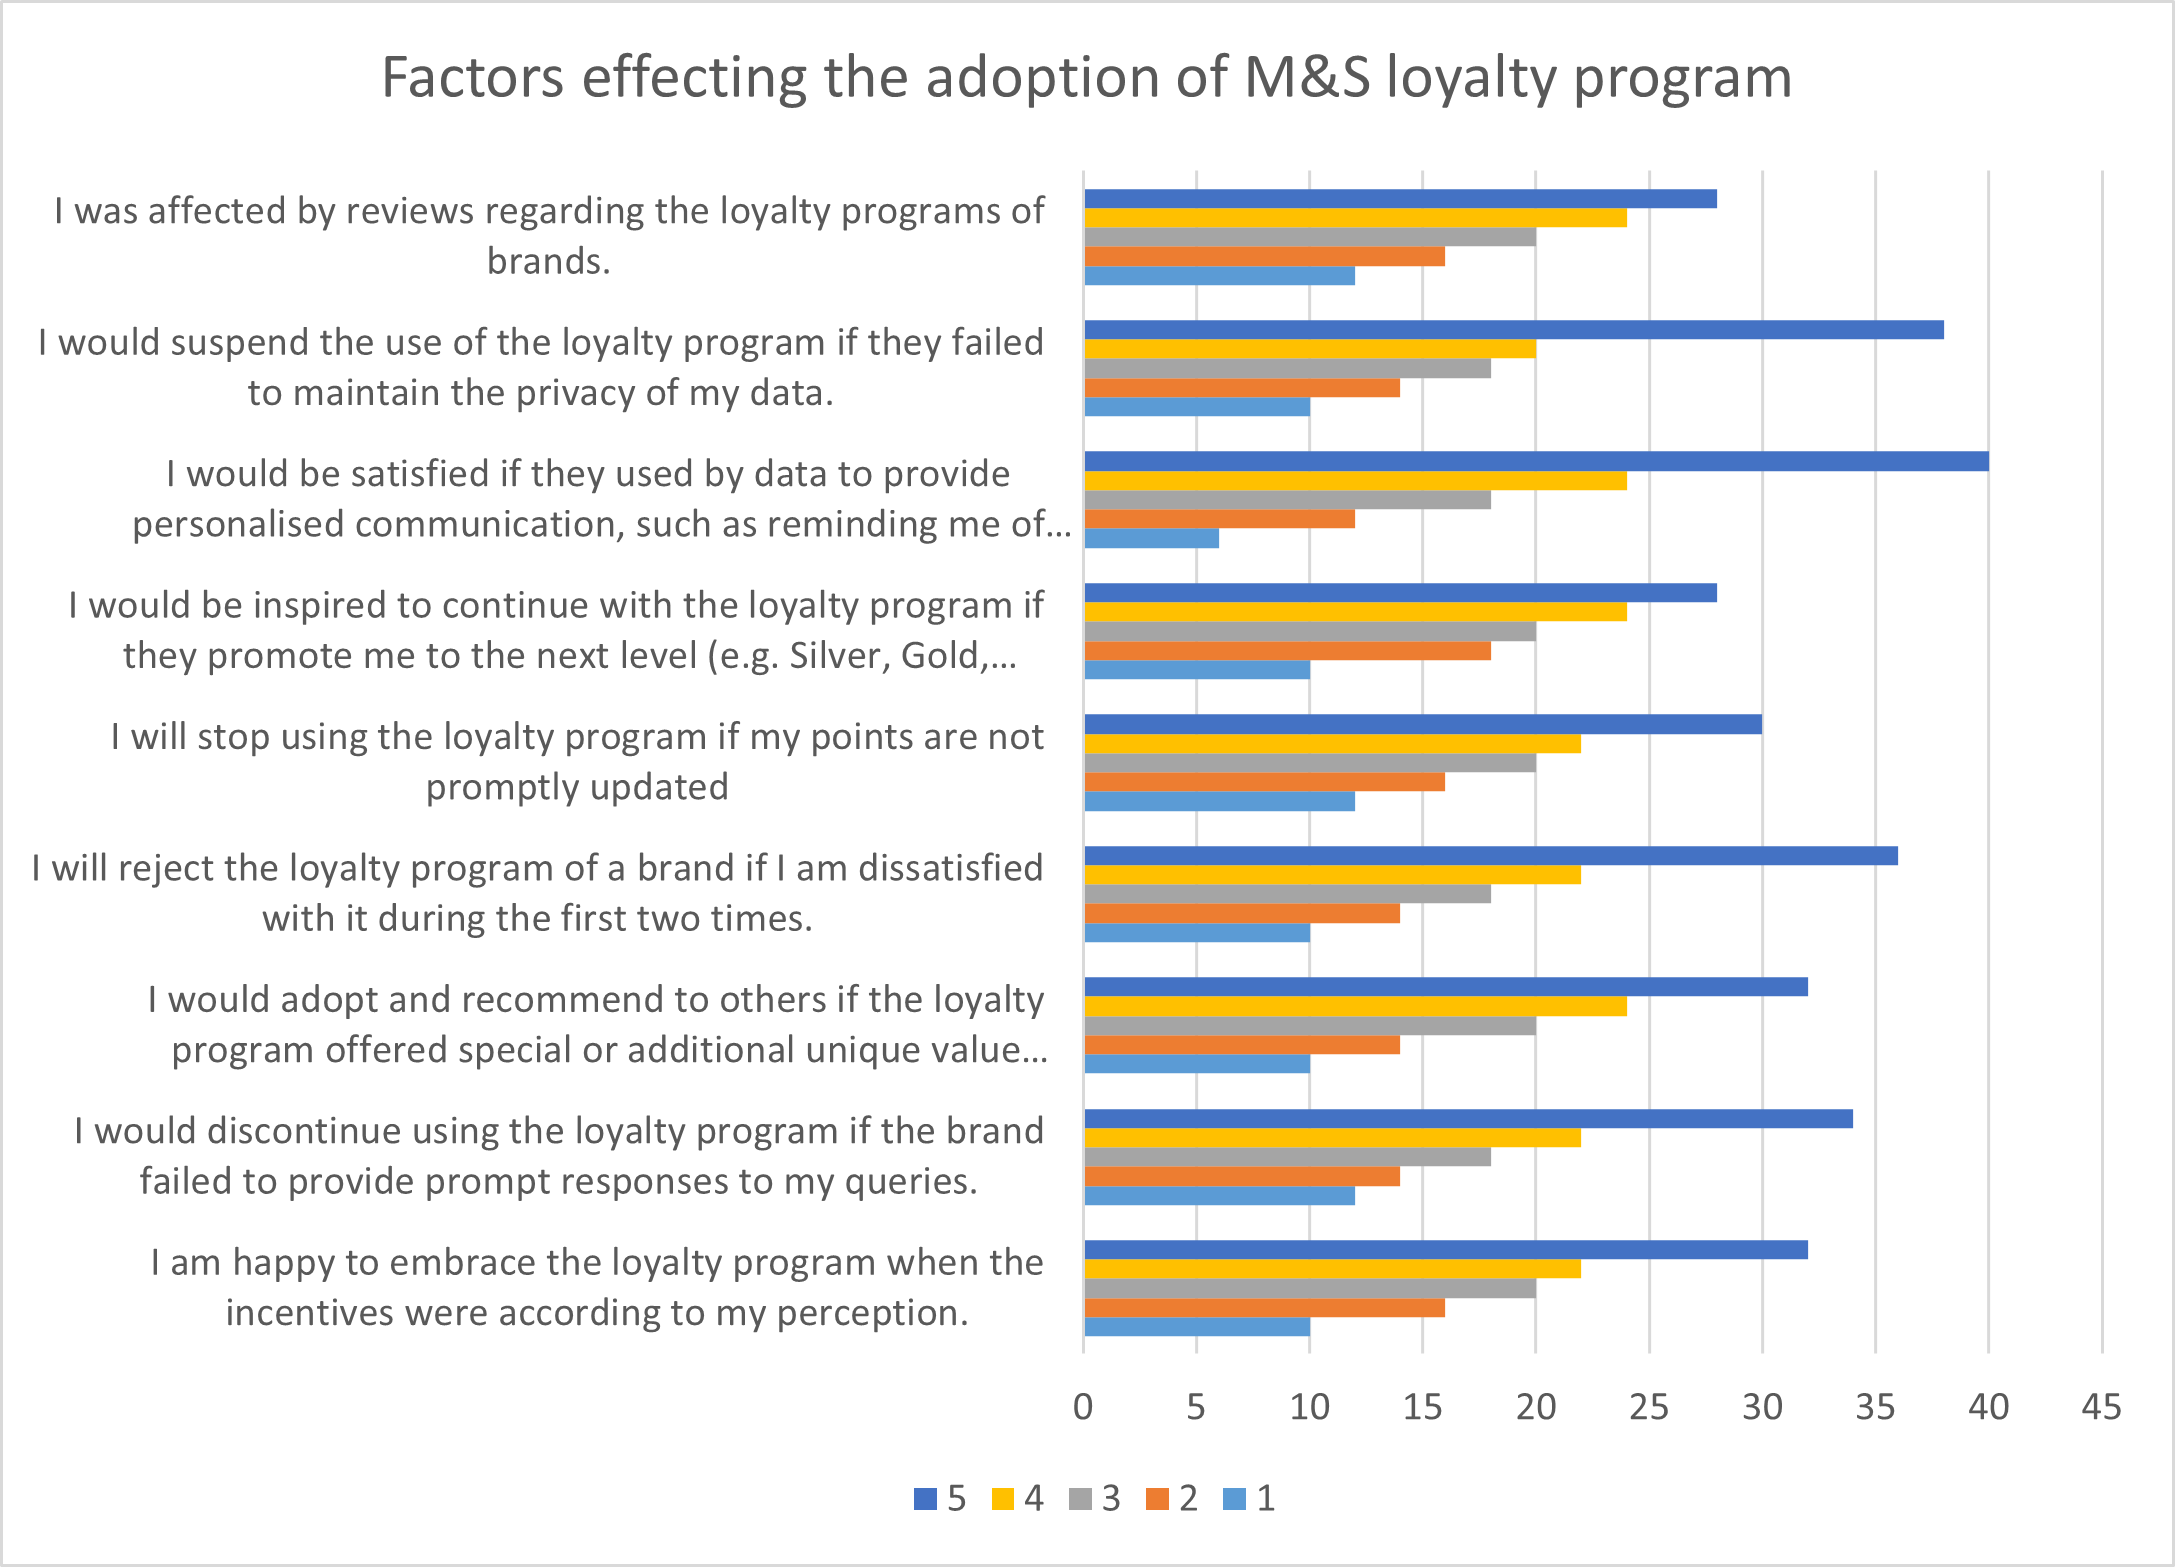 Factors affecting the adoption of the M&S loyalty program